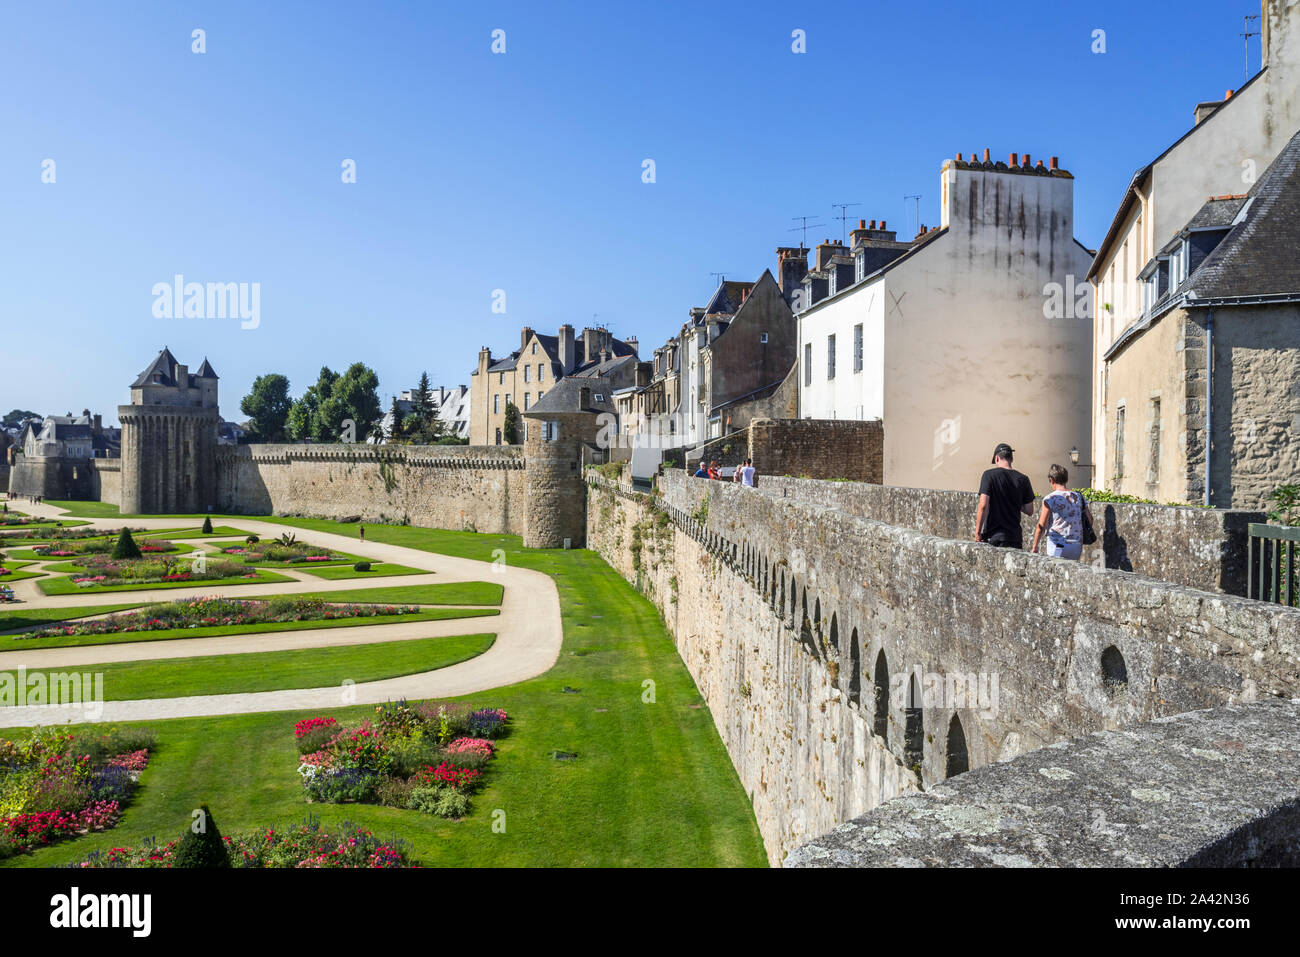 Garden of the Hermine castle / Jardin du Château de l'Hermine and tourists walking on the city walls of the town Vannes, Morbihan, Brittany, France Stock Photo